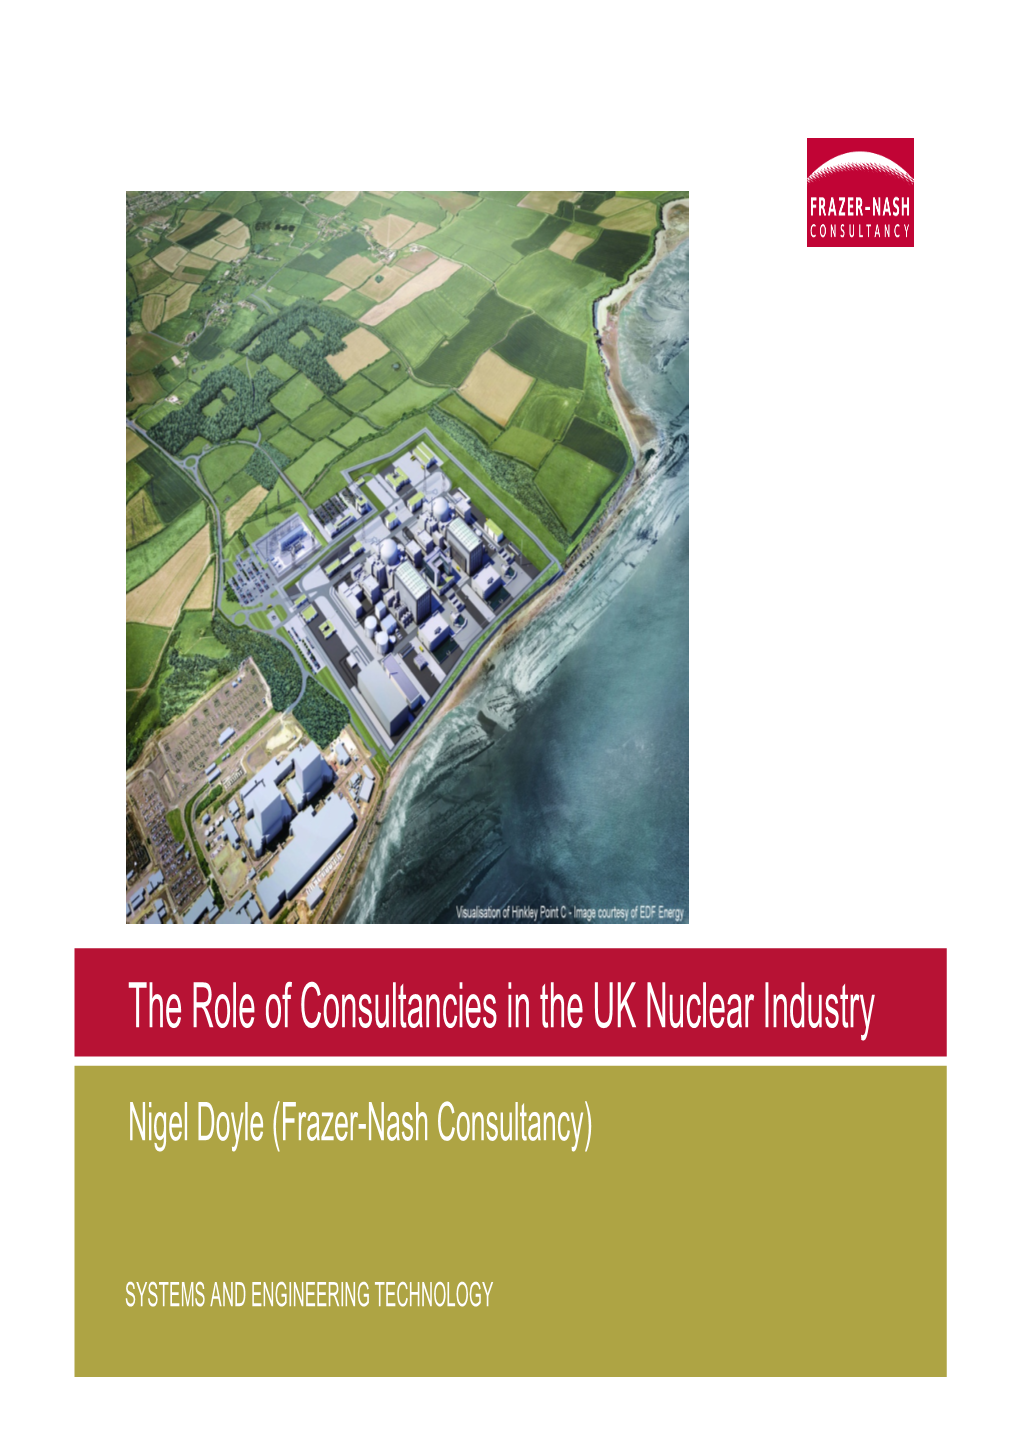 The Role of Consultancies in the UK Nuclear Industry